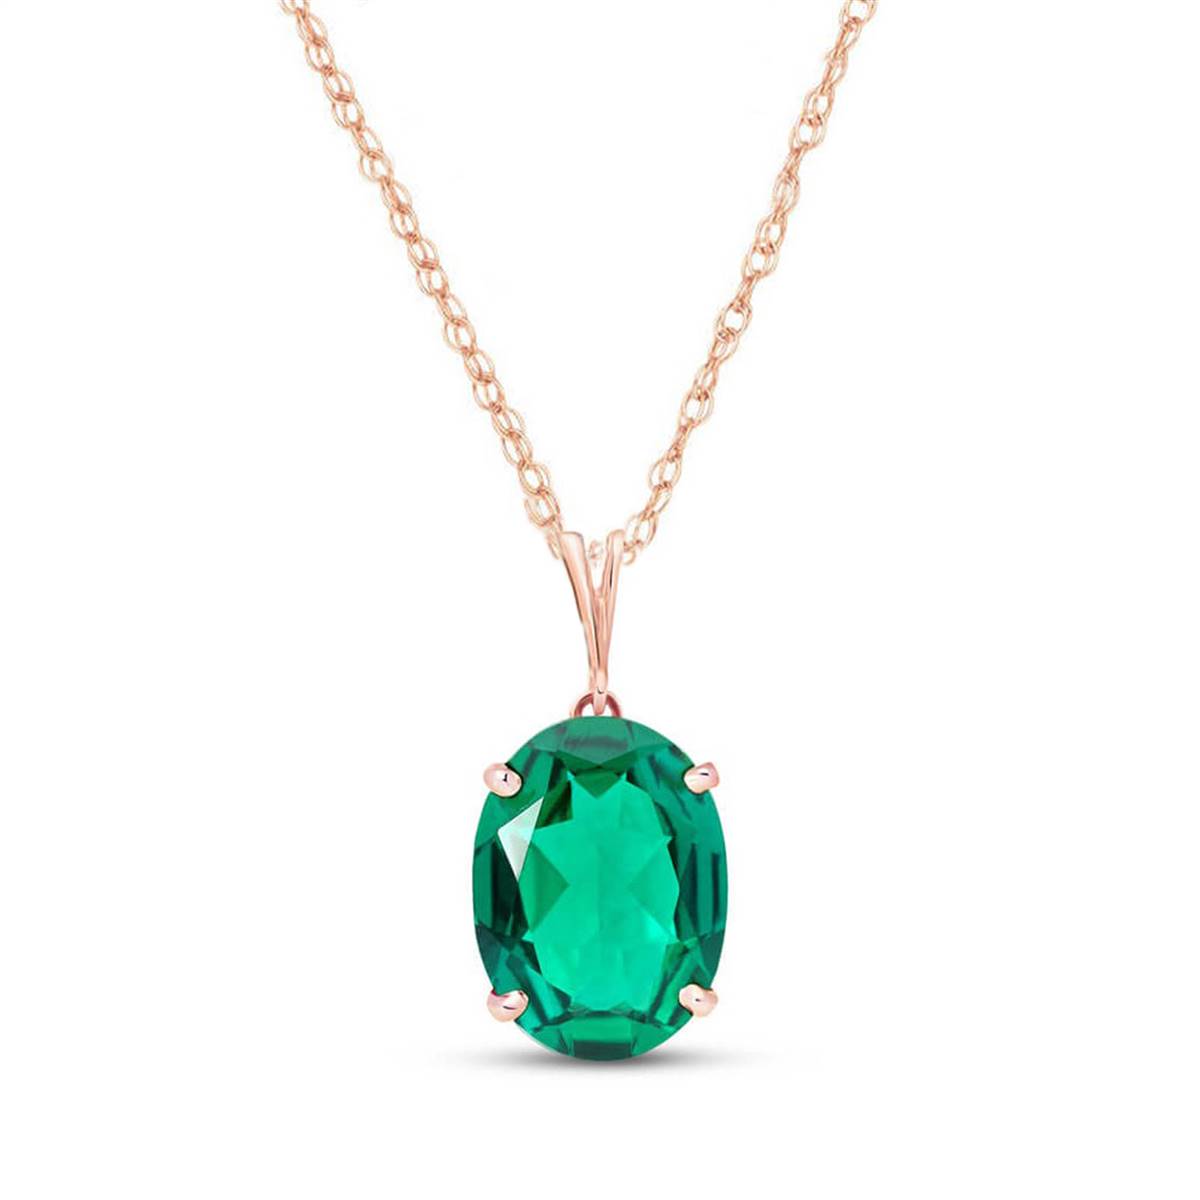 14K Solid Rose Gold Necklace With Oval Shape 4.5 ctw High Polished Genuine Emerald - Grade AAA